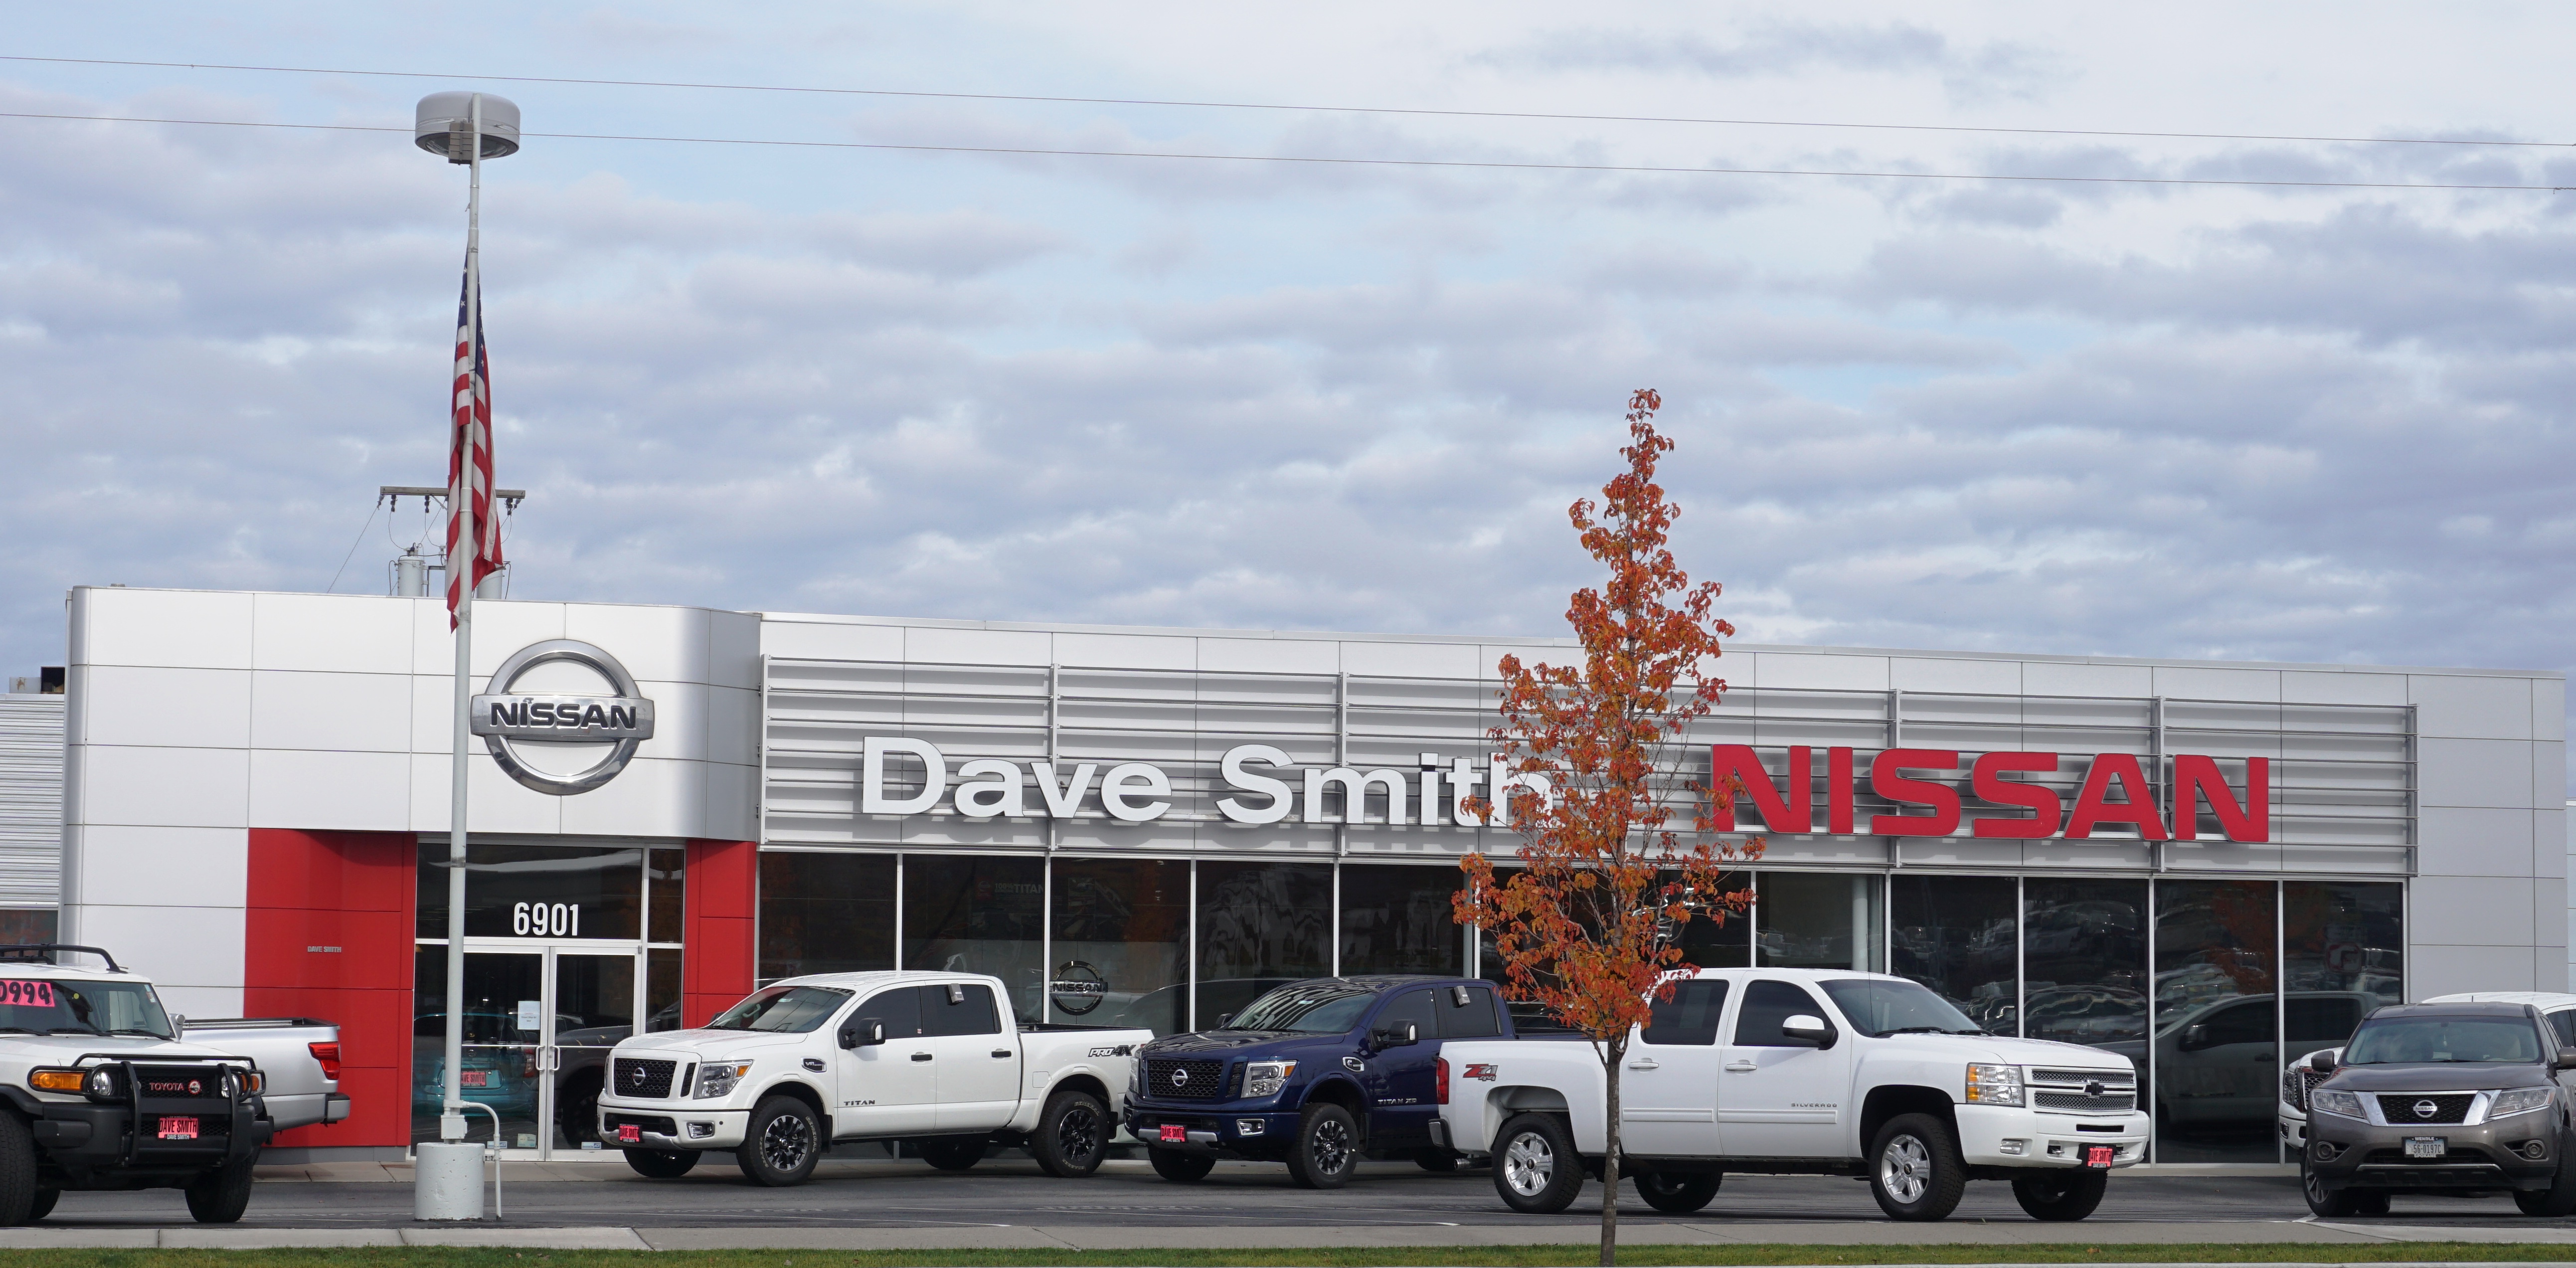 Dave Smith Nissan Auto Sales and Service